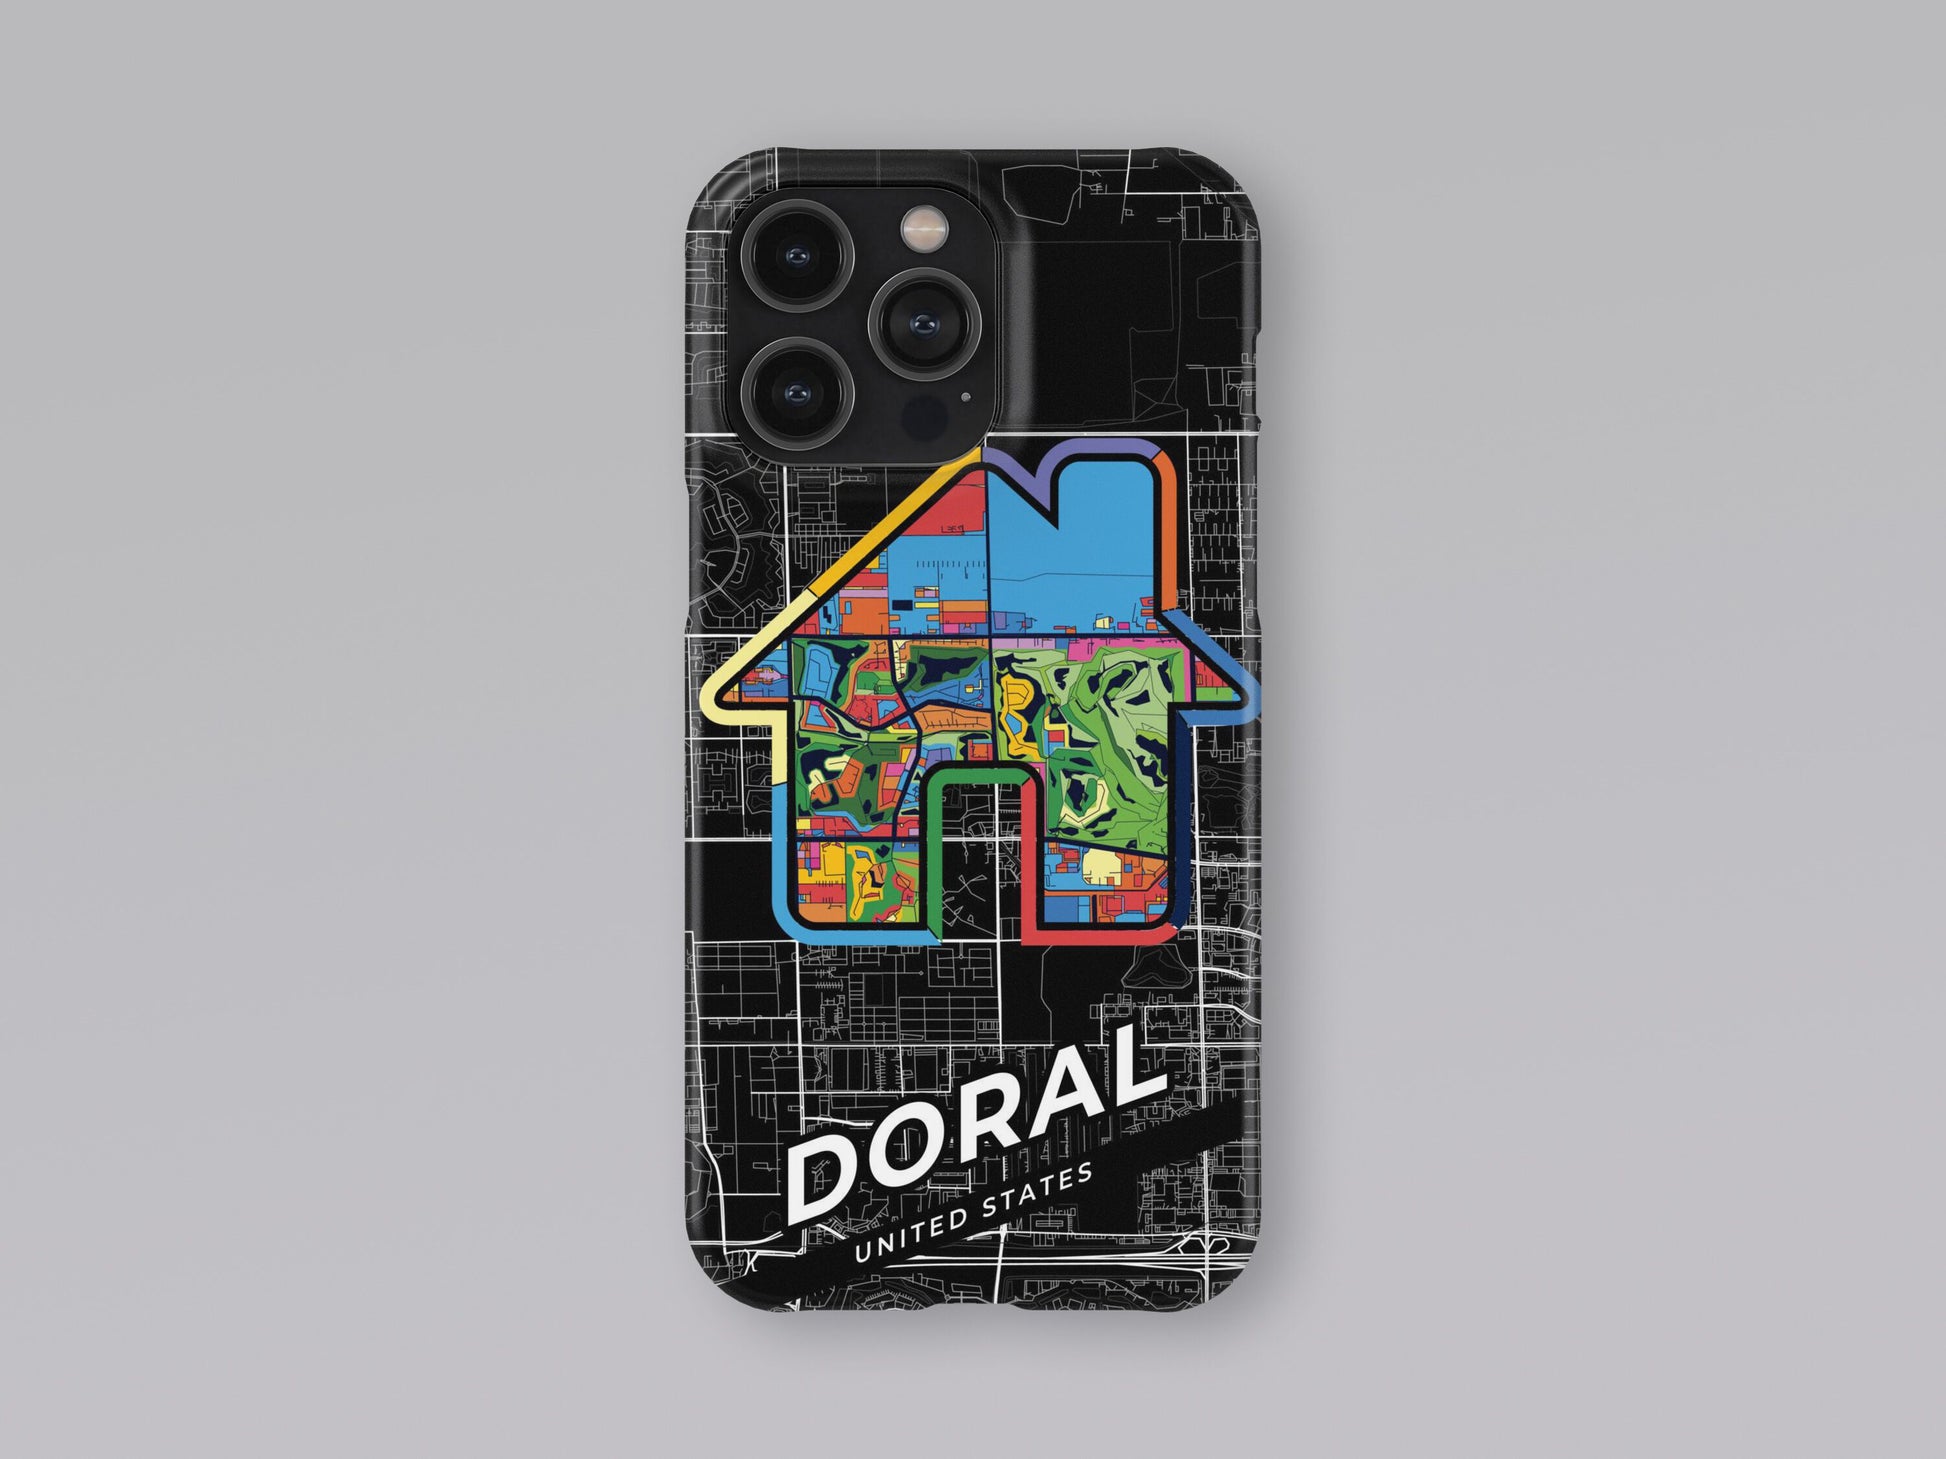 Doral Florida slim phone case with colorful icon. Birthday, wedding or housewarming gift. Couple match cases. 3